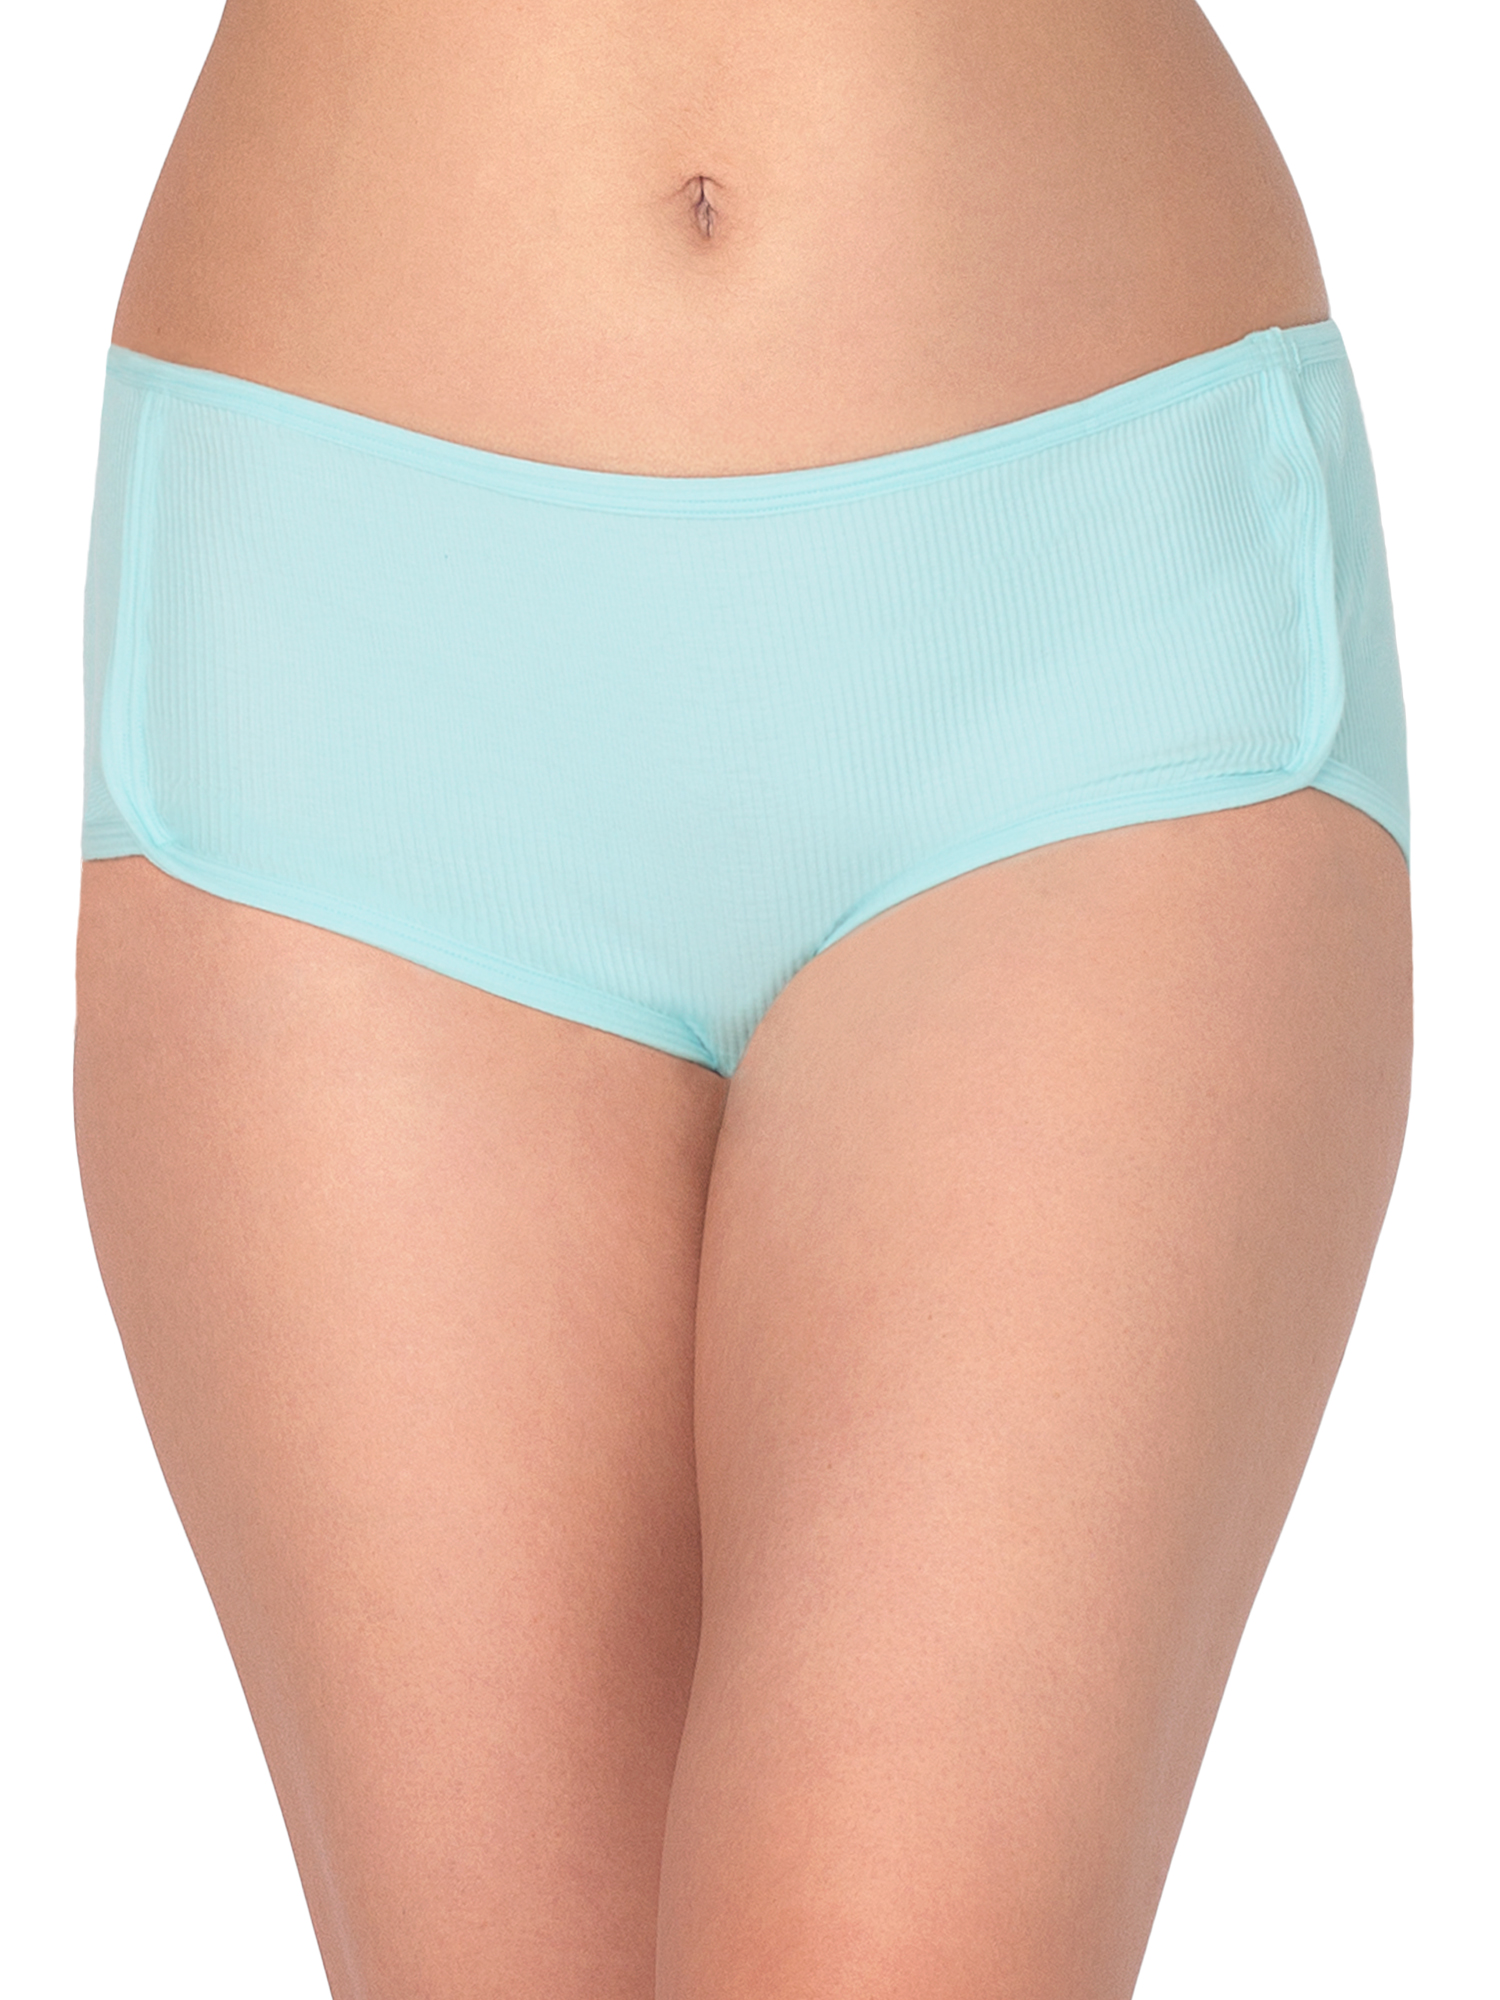 No Boundries Ribbed Printed Everyday Boy Shorts Panty (Junior's or Women's), 4 Pack - image 3 of 9